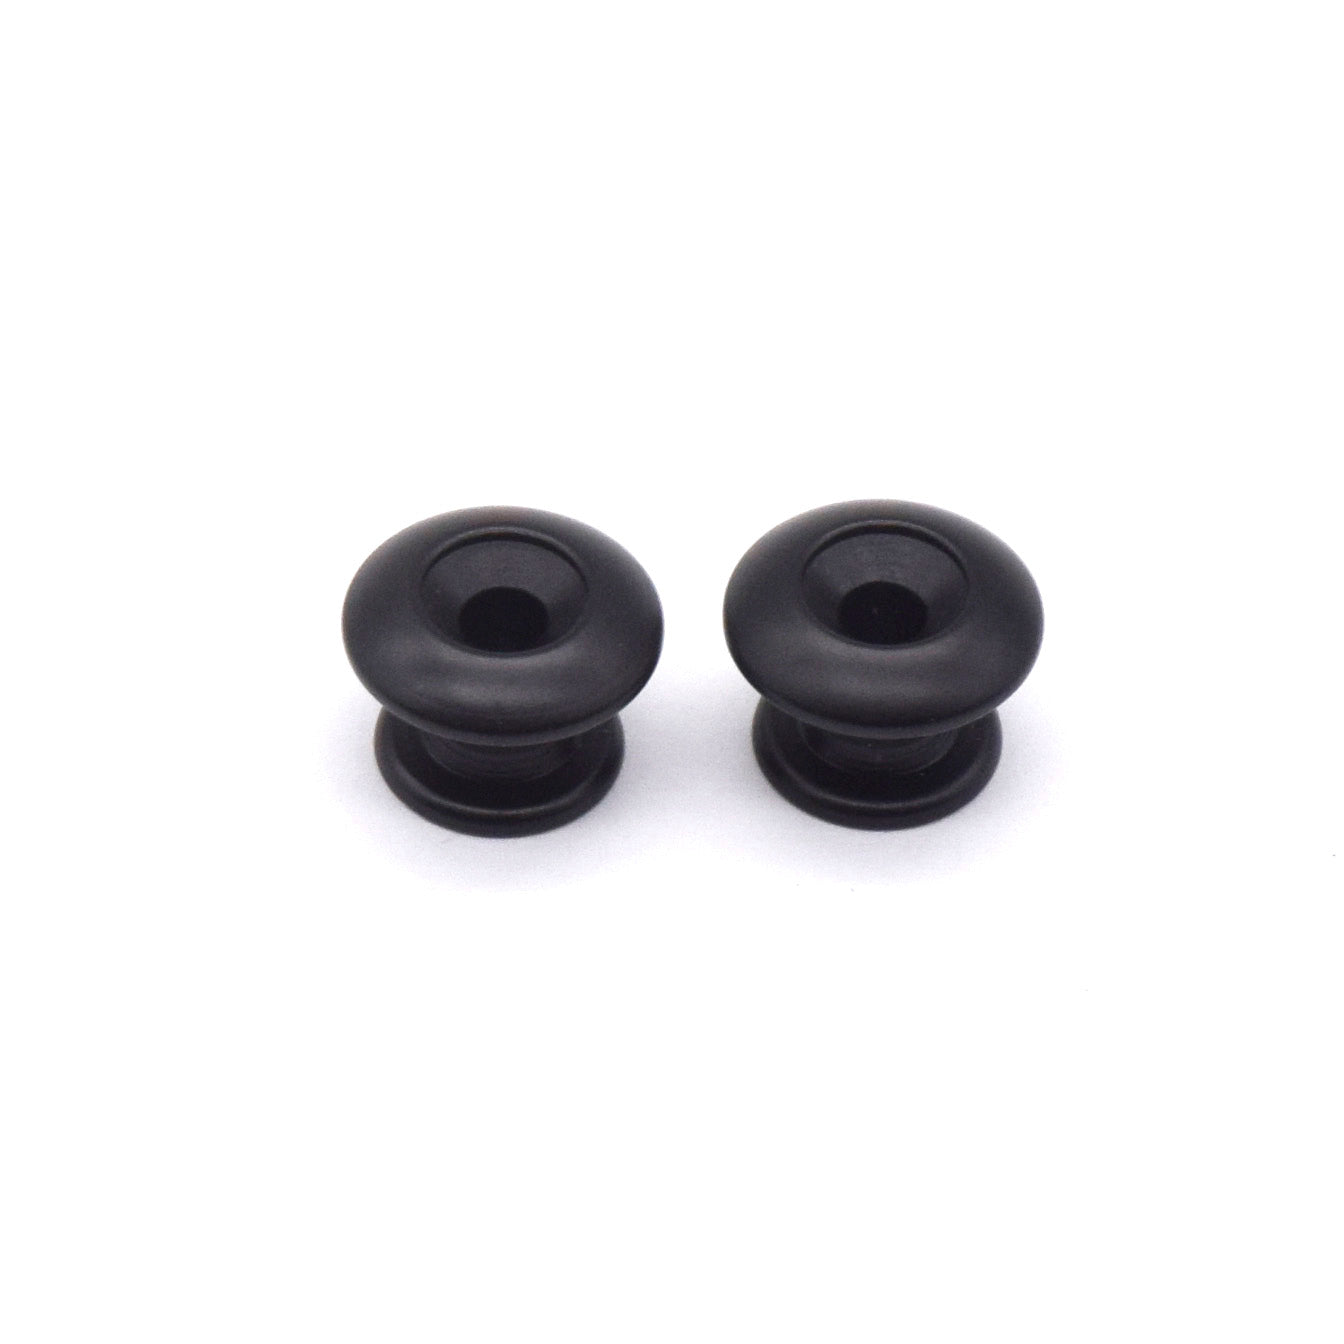 KD By AxLabs Small Strap Buttons (2) Rounded Top - 13mm Top, 10mm Bottom - AxLabs